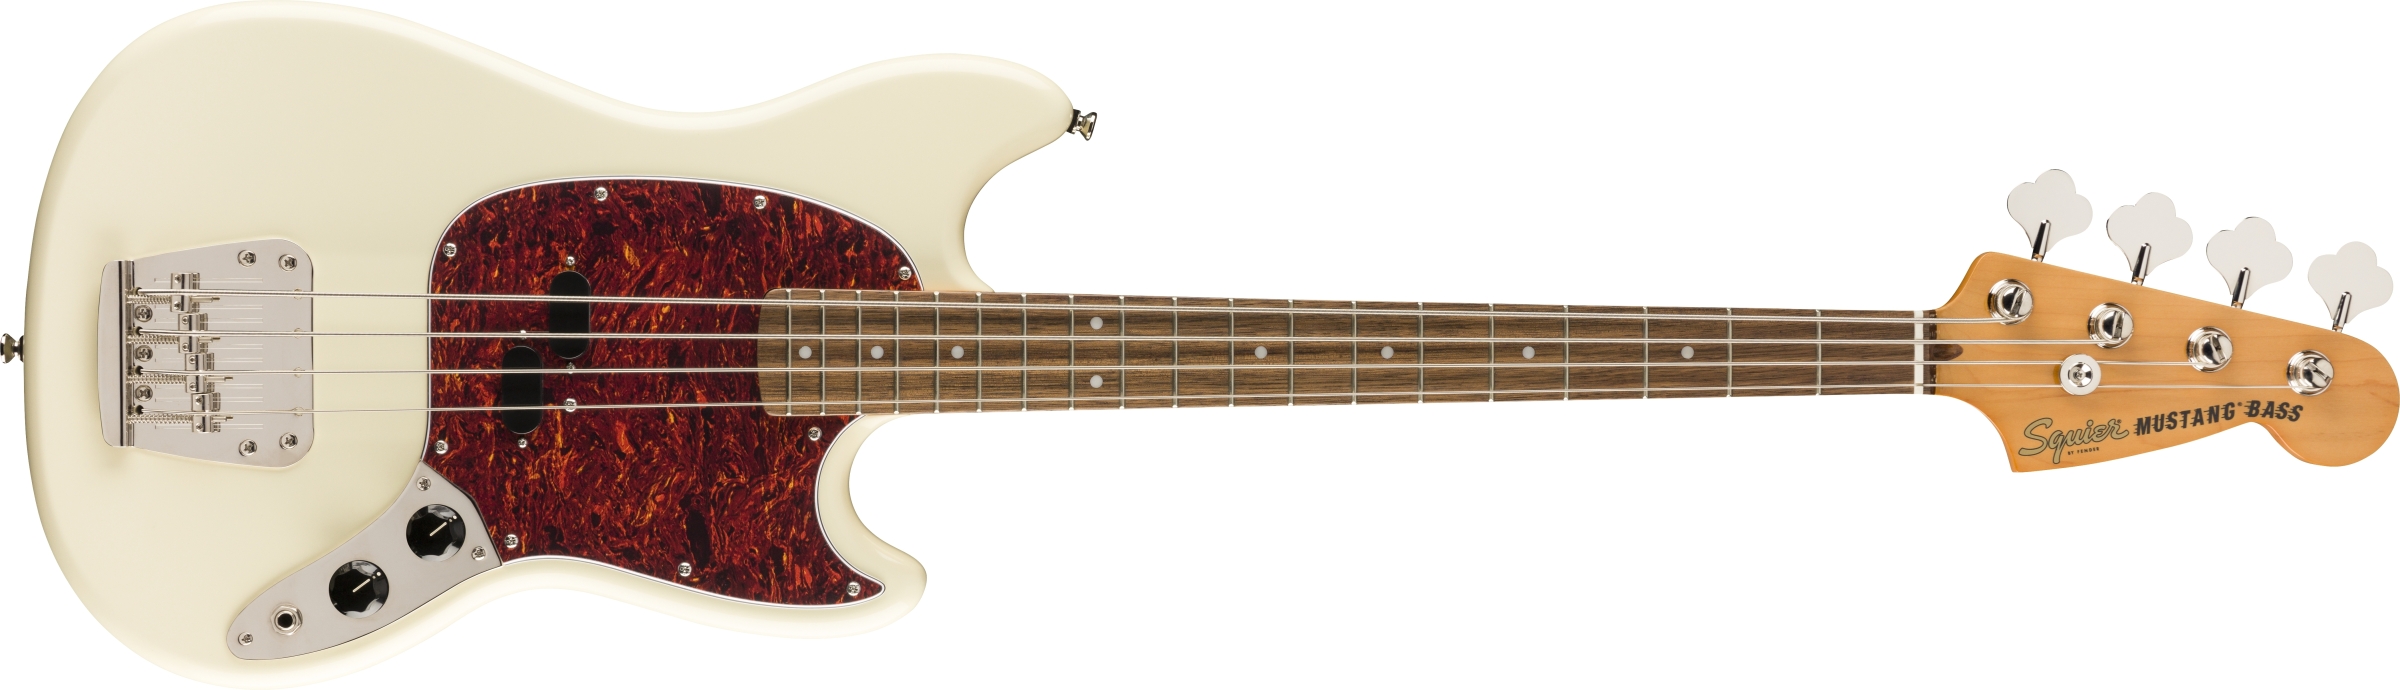 SQUIER Classic Vibe 60s Mustang Bass SHORT SCALE LF Olympic White 0374570505 - Bassi Bassi - Elettrici 4 Corde